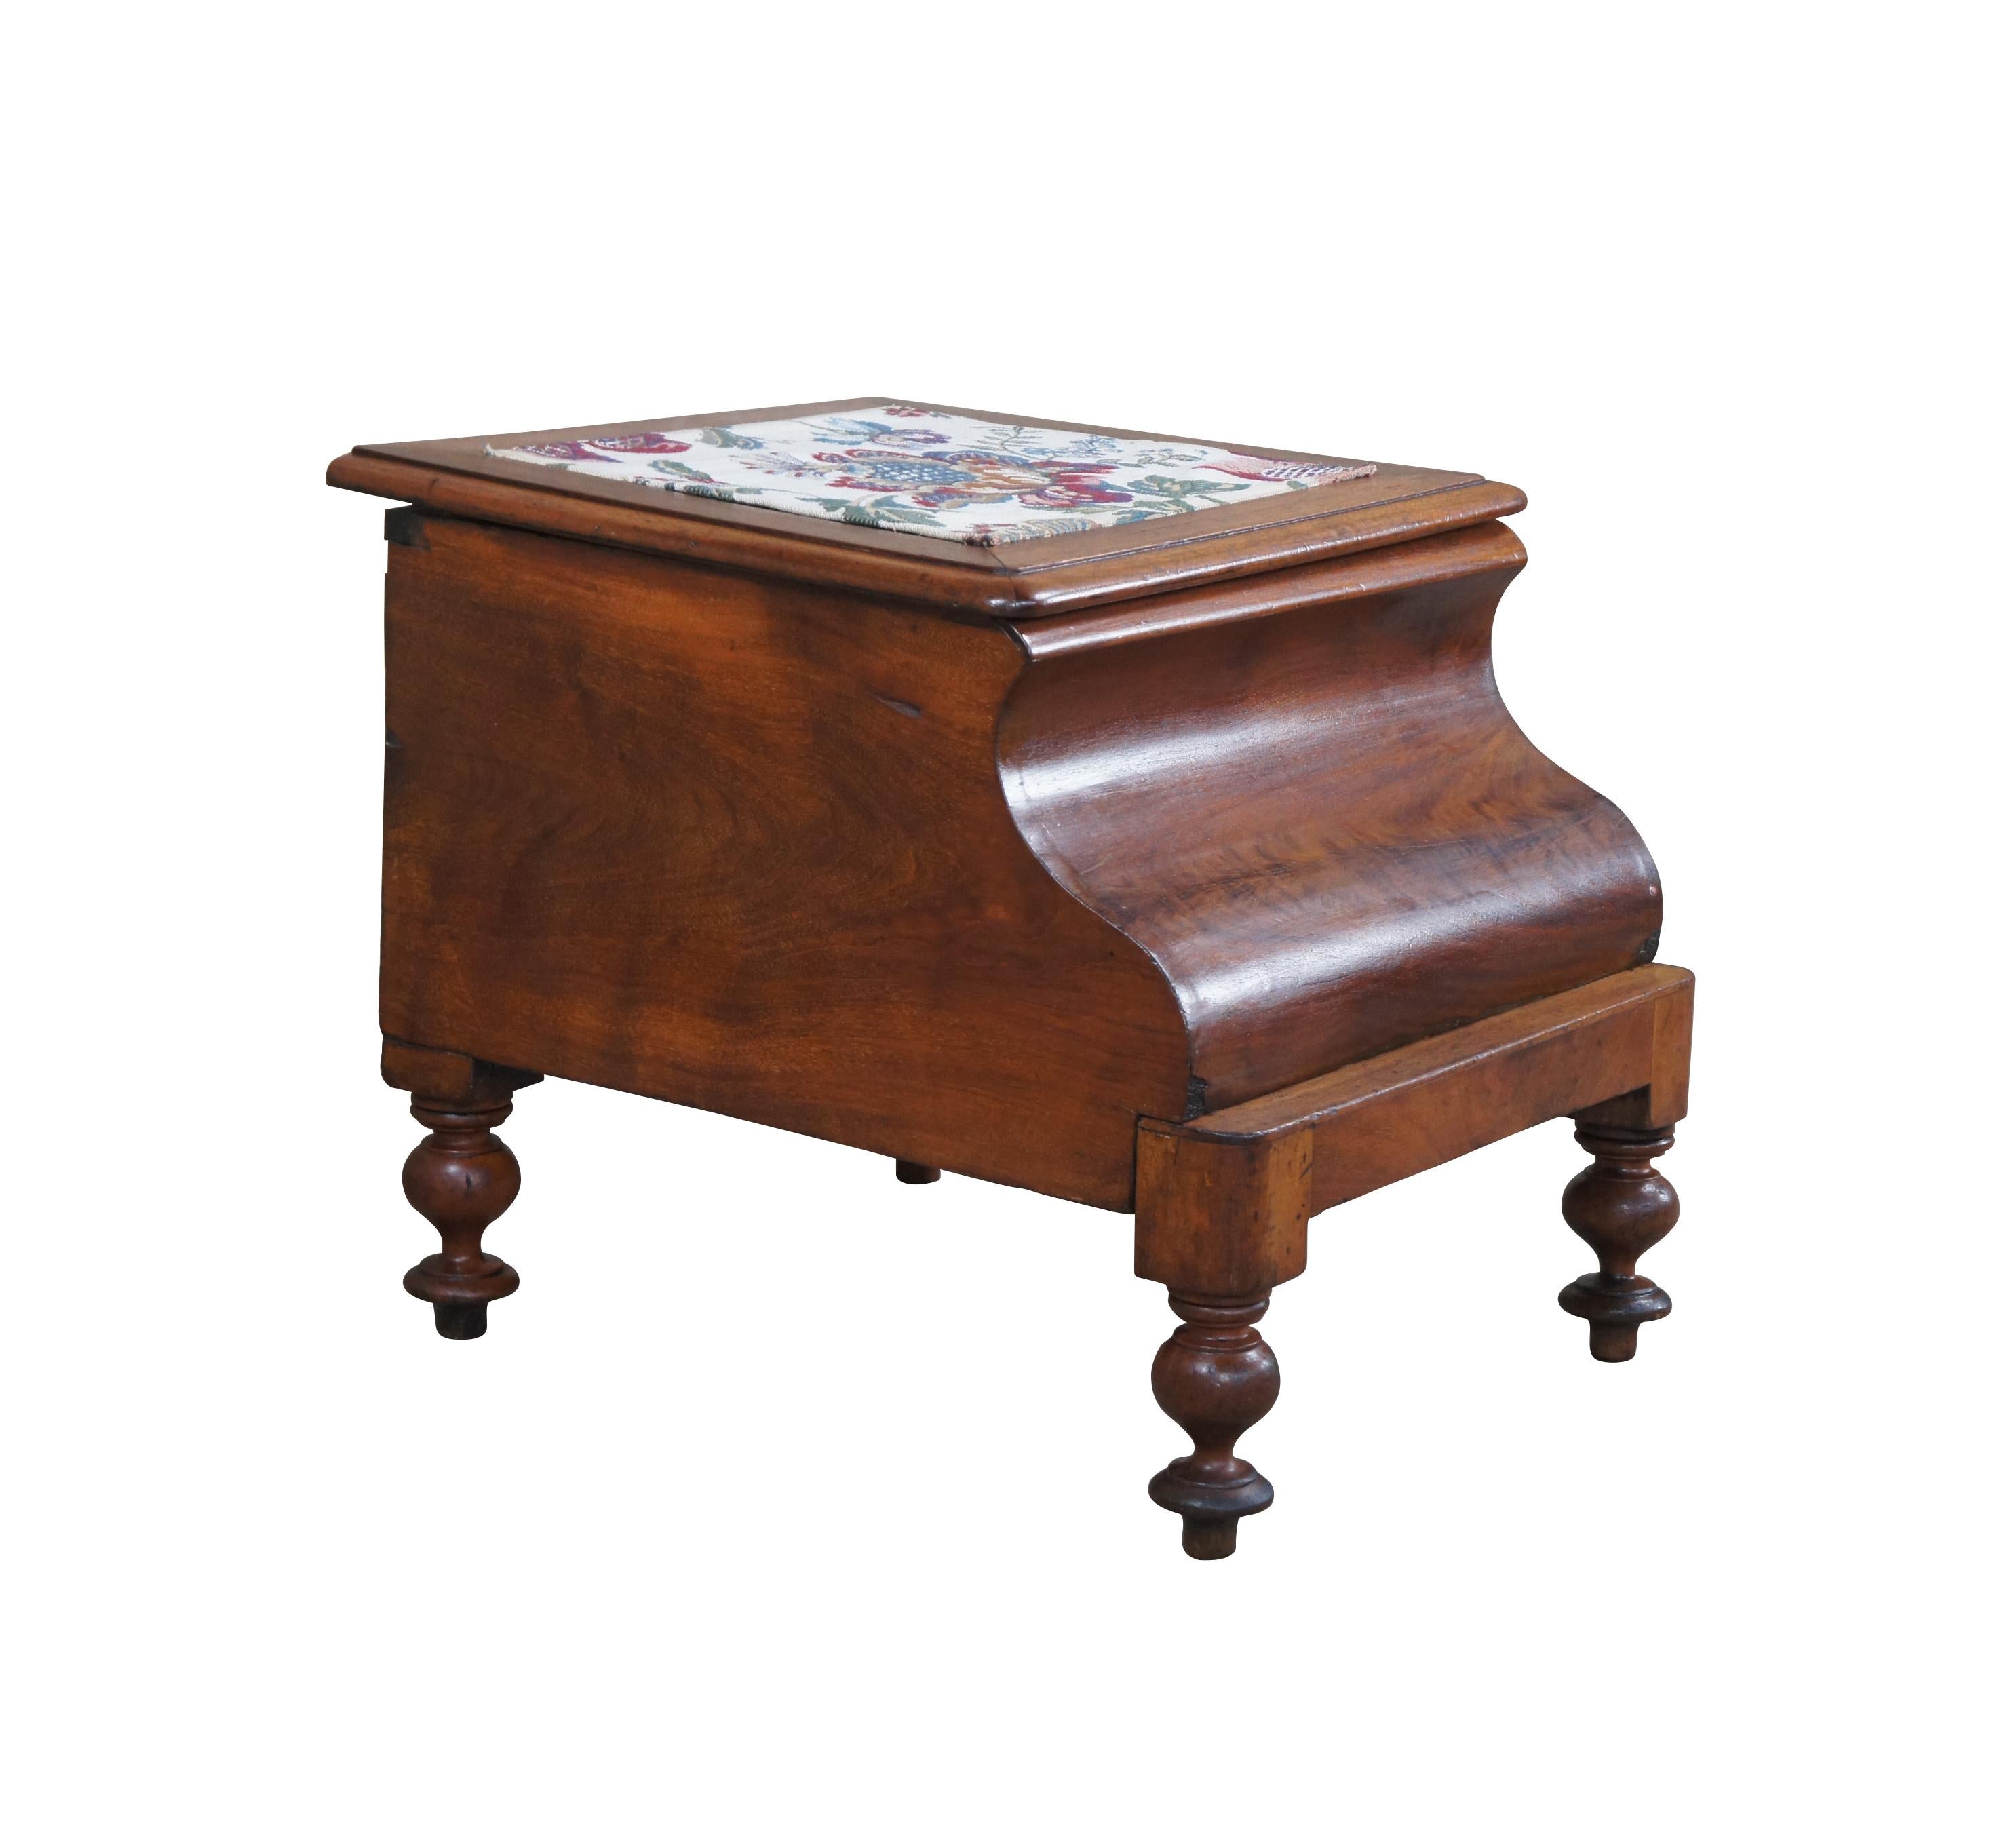 Mid 19th century chamber pot or commode. Made from mahogany with a crotch mahogany contoured front. Features a pull out needelepoint steep stool and matching embroidered top. The top opens to a porcelain chamber with lid. The case is supported by